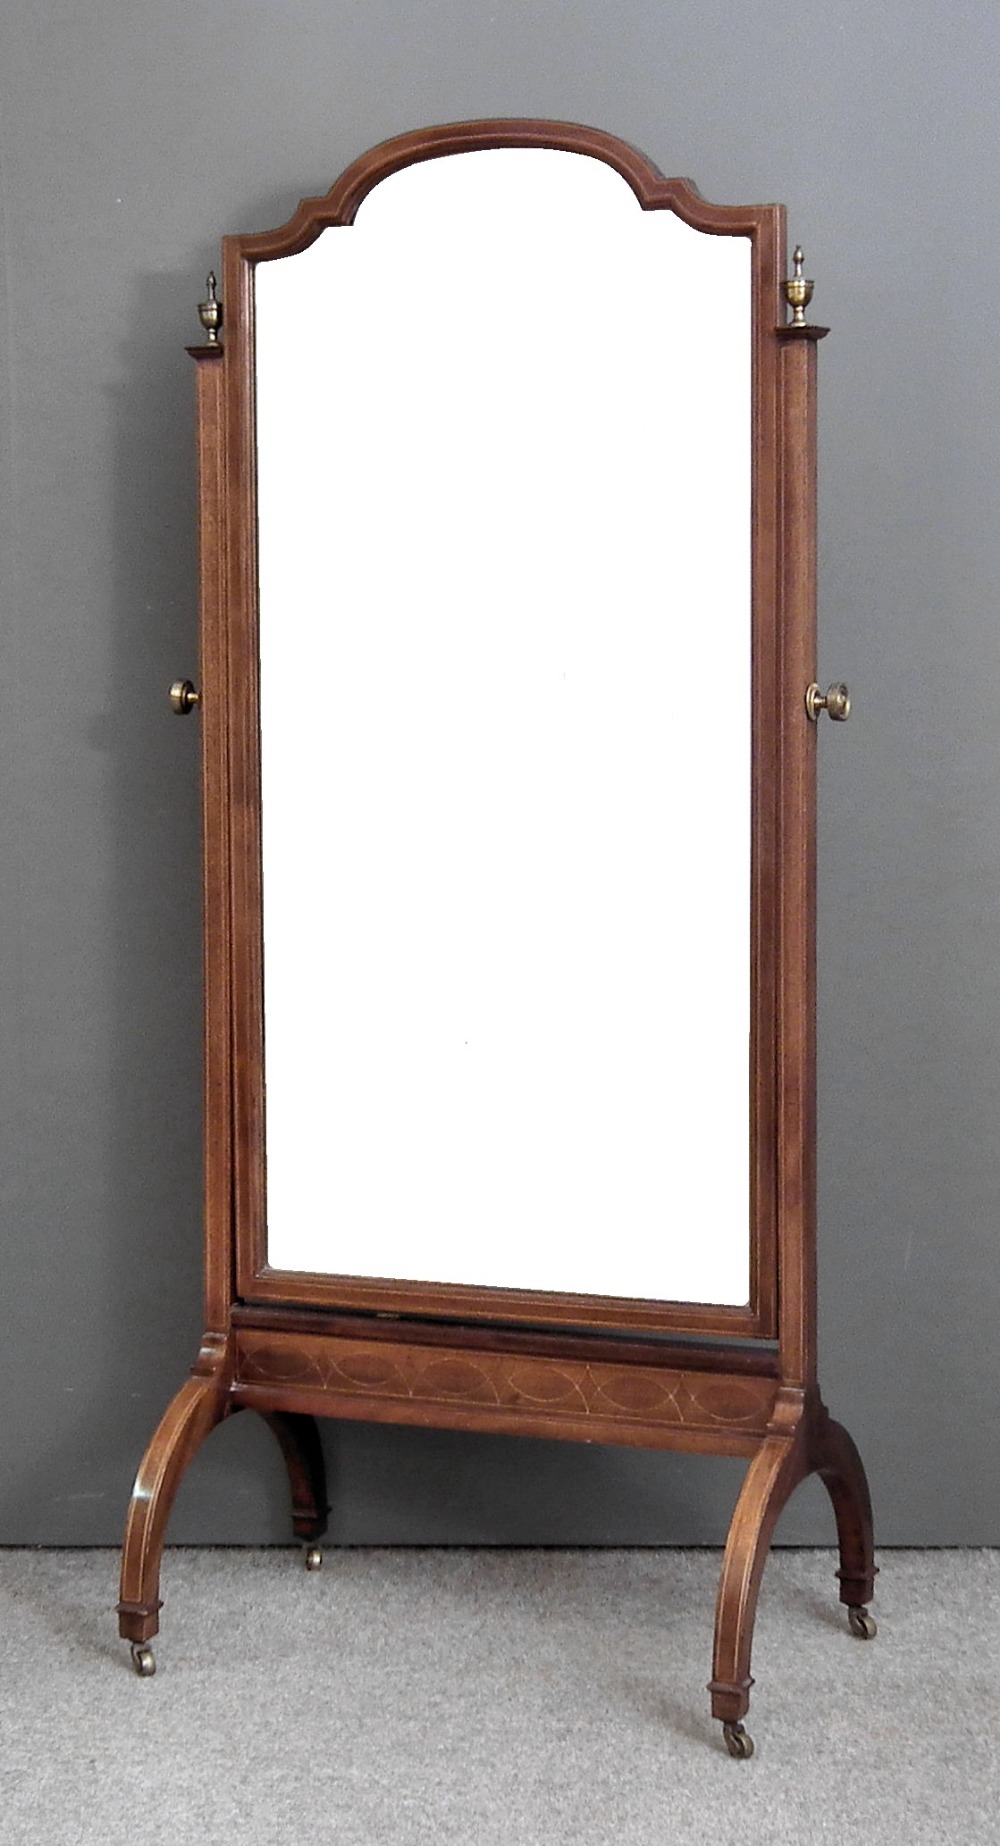 An Edwardian mahogany framed cheval mirror inlaid with boxwood stringings and with bevelled mirror